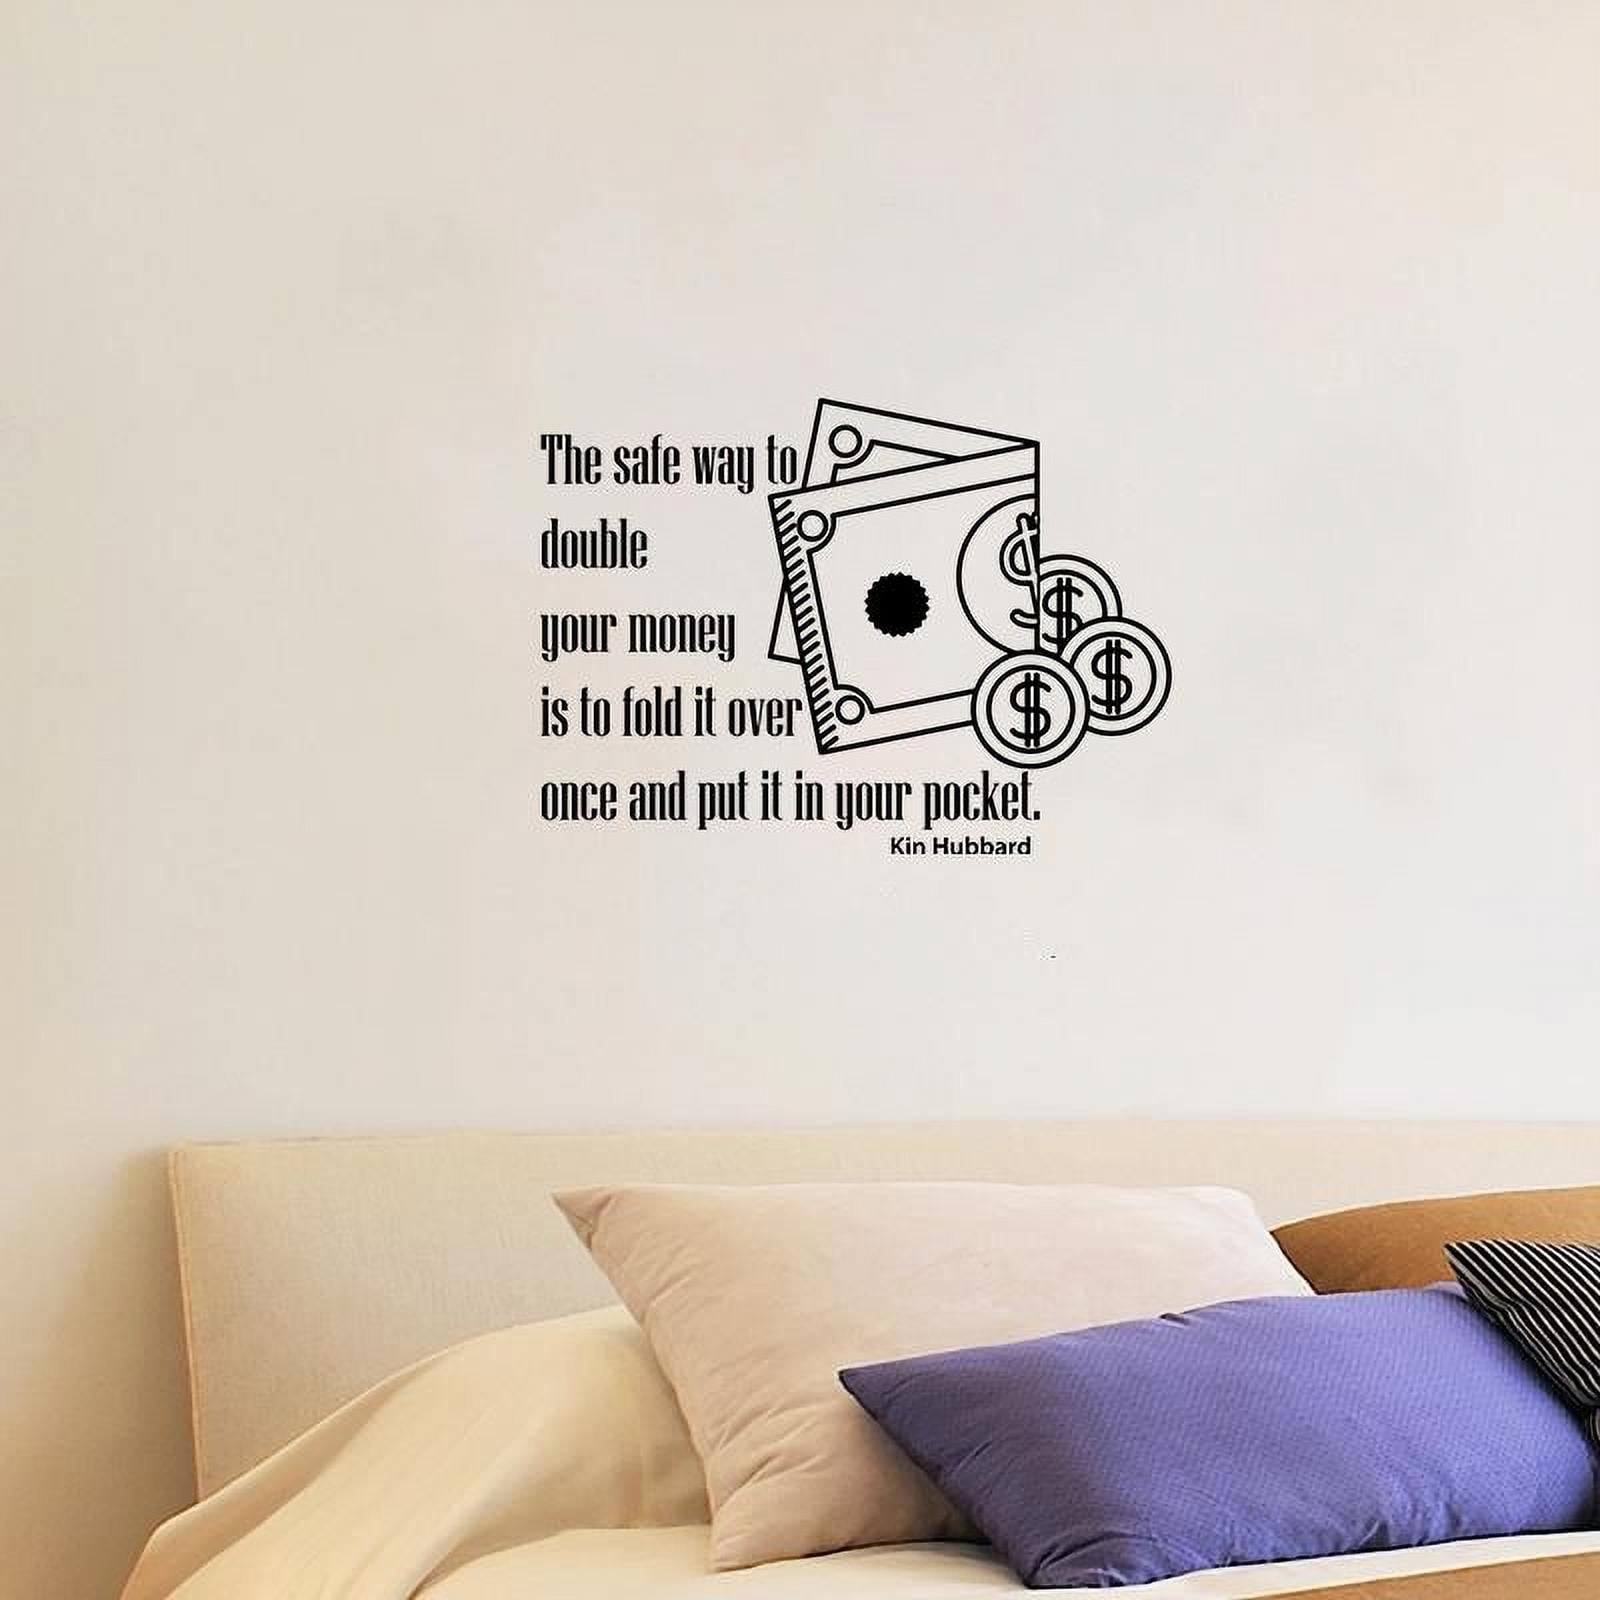 Safe Way To Double Your Money Funny Humor Quotes Wall Sticker Art Decal for  Girls Boys Room Bedroom Nursery Kindergarten House Fun Home Decor Stickers  Wall Art Vinyl Decoration Size (27x30 inch) -